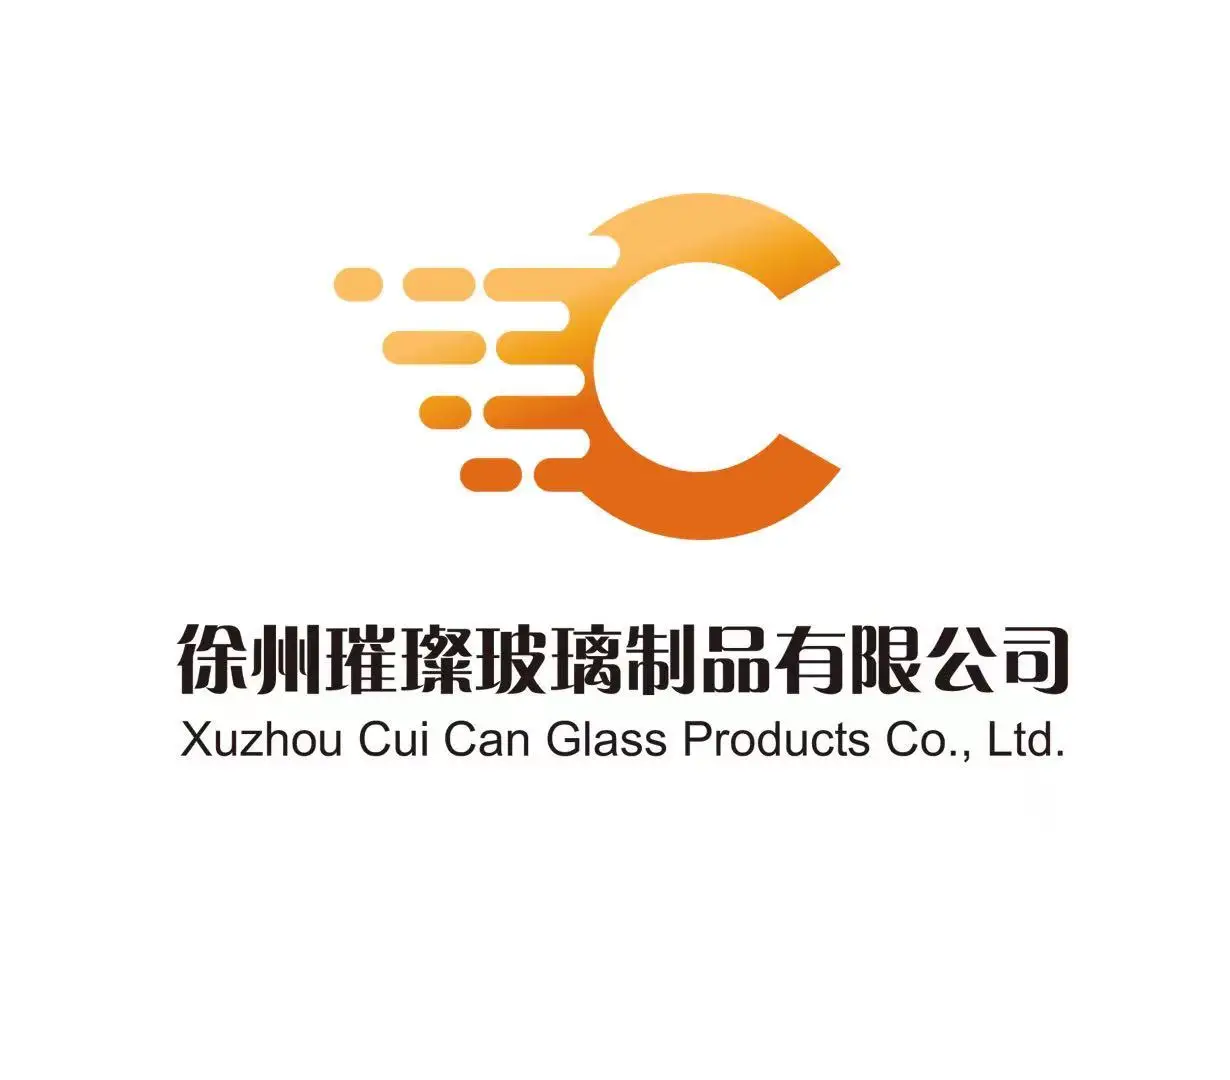 Xuzhou cuican glass products Co., Ltd